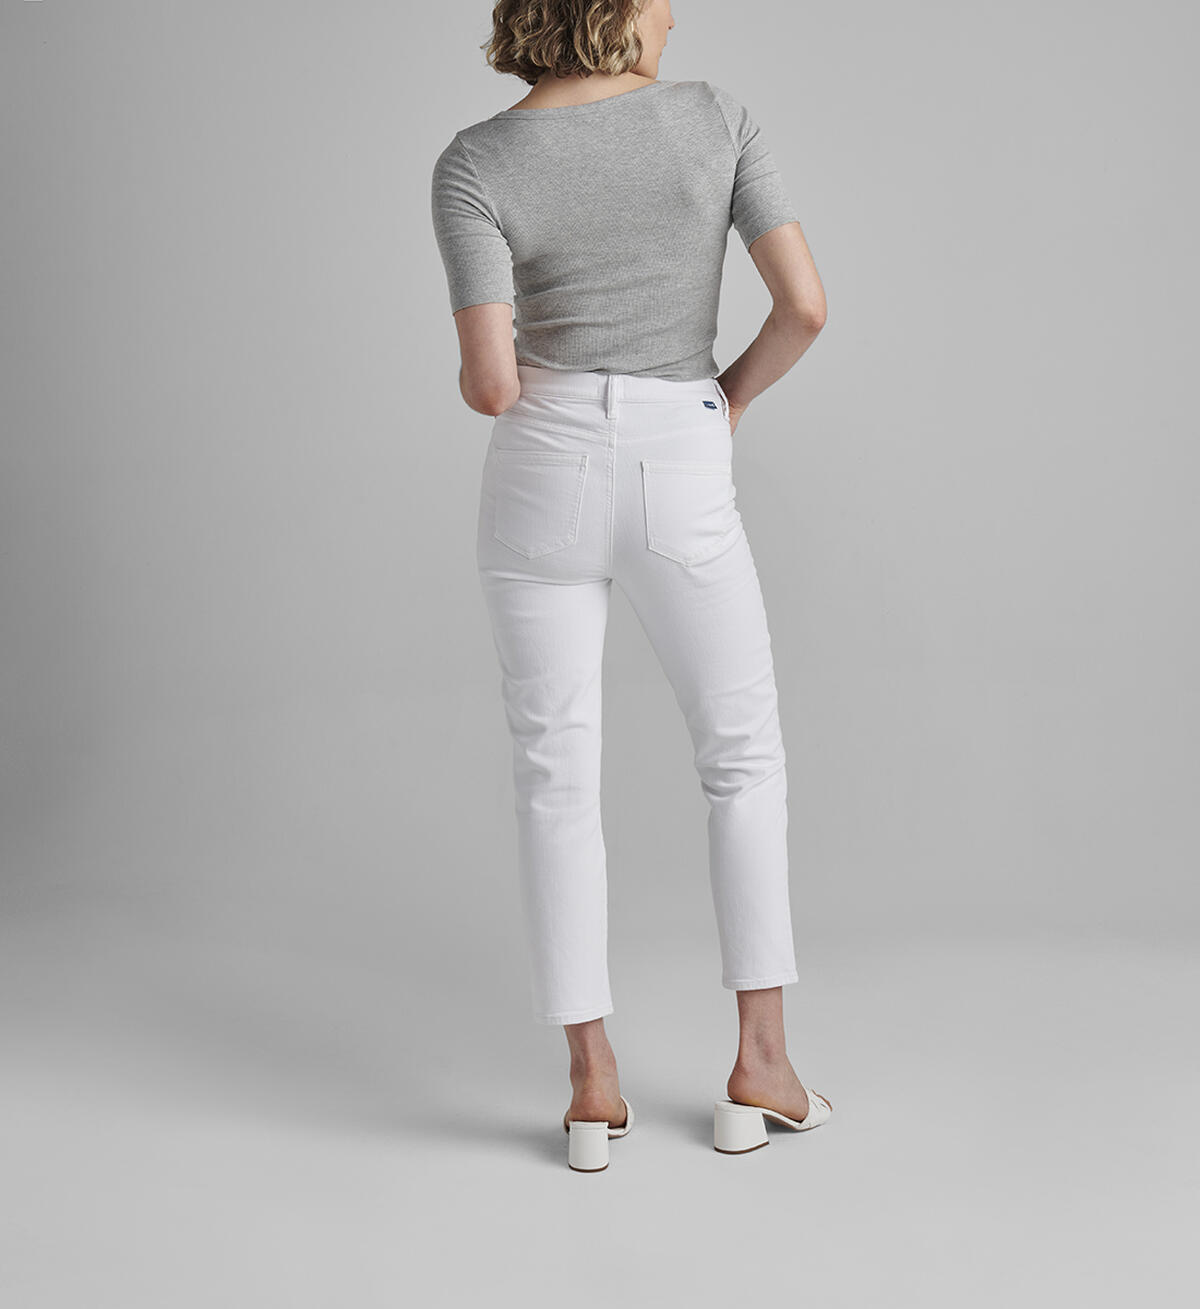 Valentina High Rise Straight Crop Pull-On Jeans, , hi-res image number 1